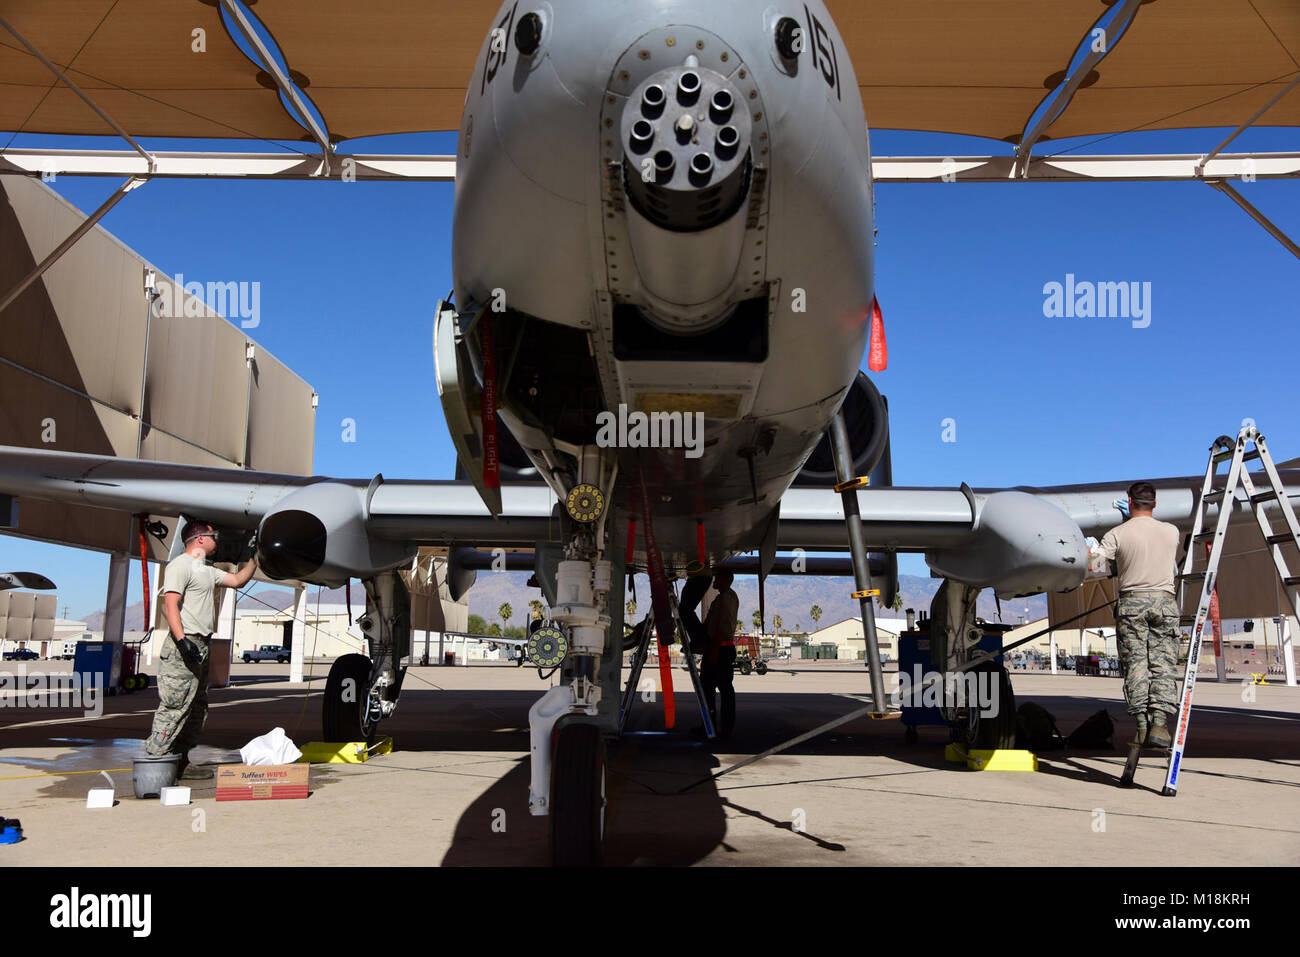 The A-10C Thunderbolt II Demonstration Team cleans and maintains an A-10 at Davis-Monthan Air Force Base, Ariz., Jan. 23, 2018. The A-10 Demo Team and A-10 Heritage Flight pilots are scheduled to support a Heritage Flight flyover during the opening ceremonies of Super Bowl LII in Minneapolis, Minnesota. (U.S. Air Force Stock Photo